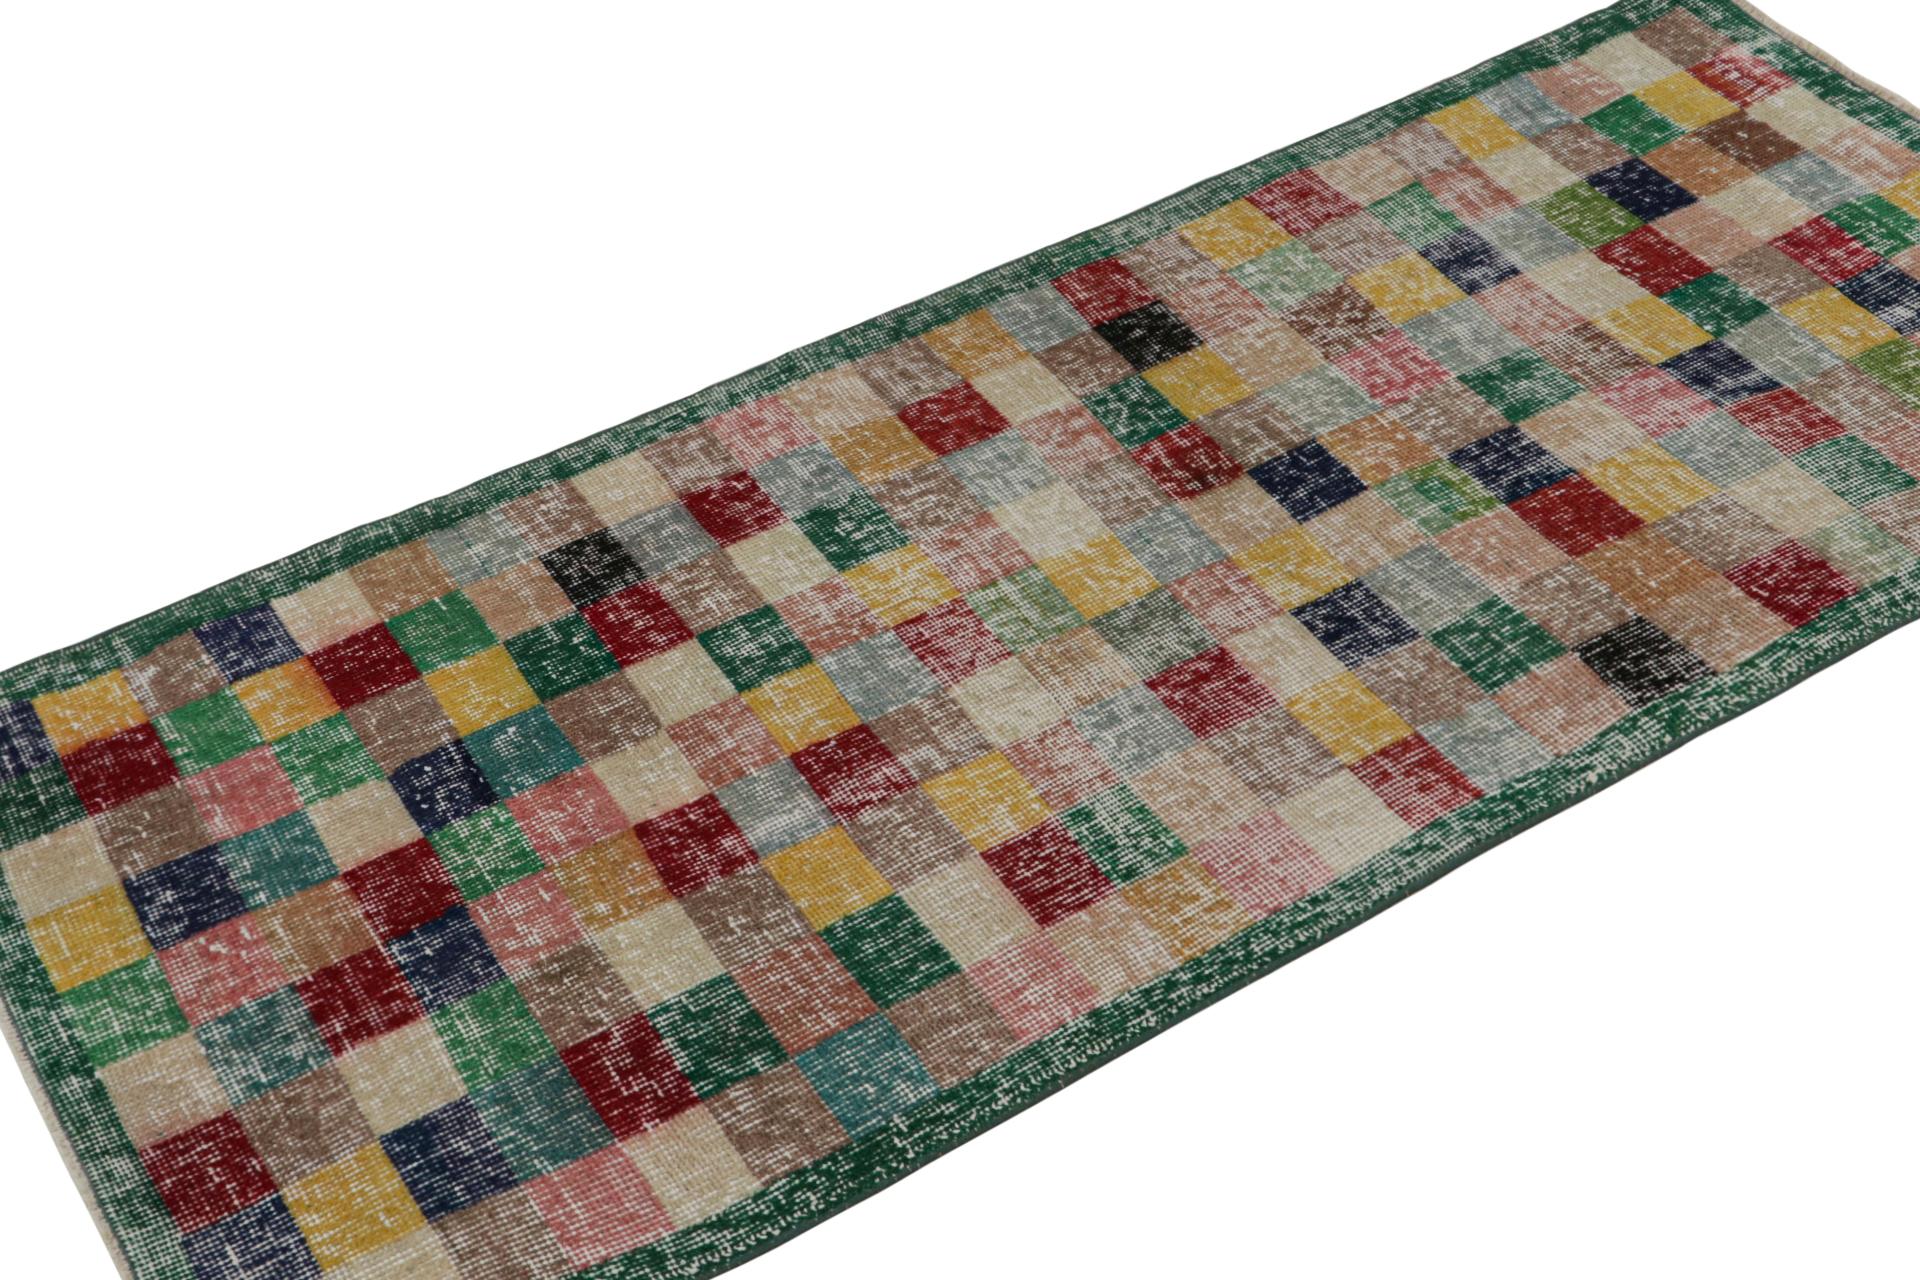 This vintage 2x5 Art Deco rug, hand-knotted in wool, circa 1960-1970, features a mid-century take on Art Deco and cubist sensibilities, with Zeki Müren’s sought-after sense of playful color and movement therein.  

On the Design: 

Connoisseurs will